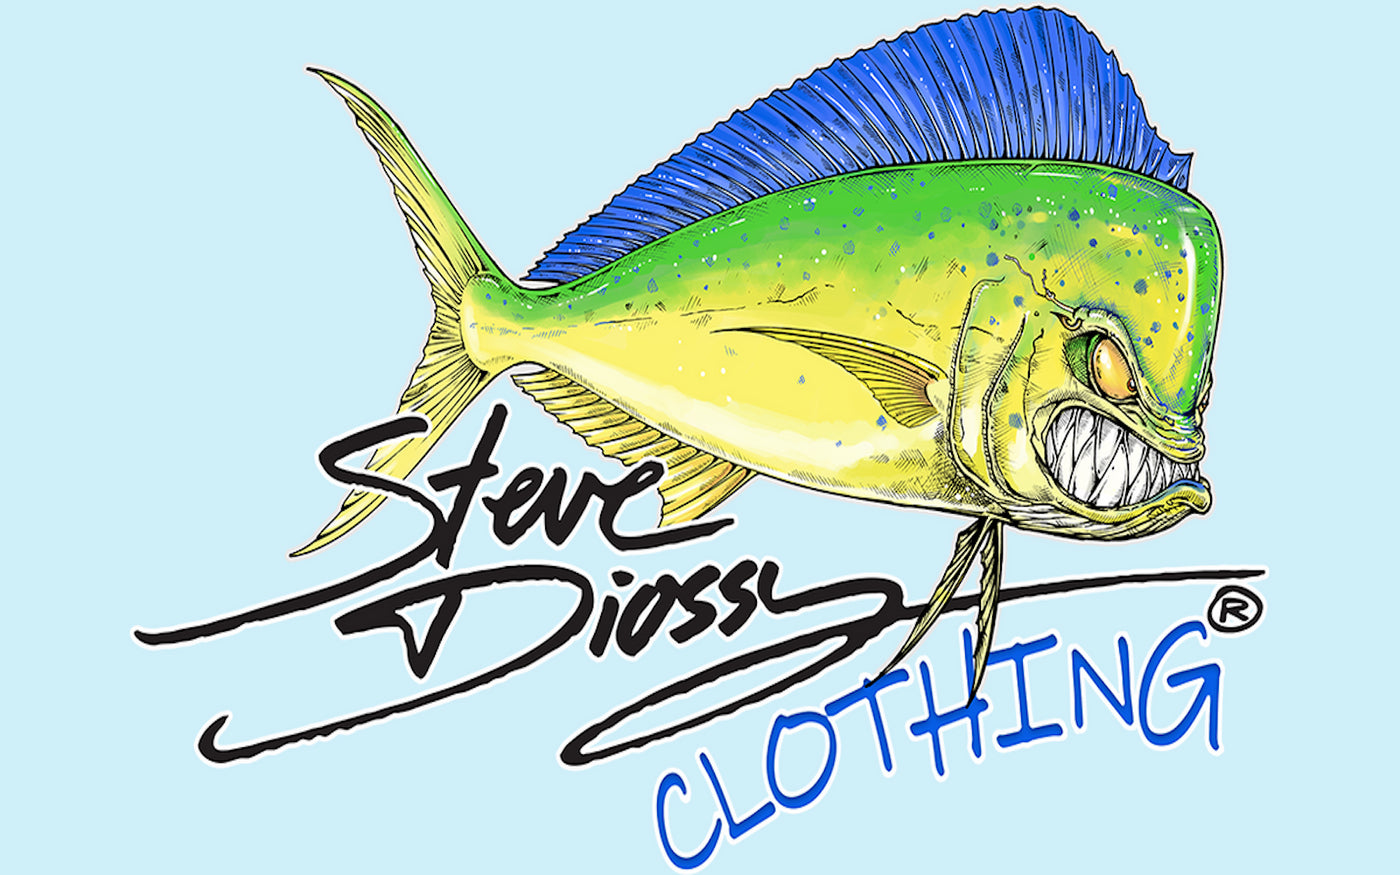 Steve Diossy Marine Artist: ART, SHIRTS & MORE for the Whole Family!